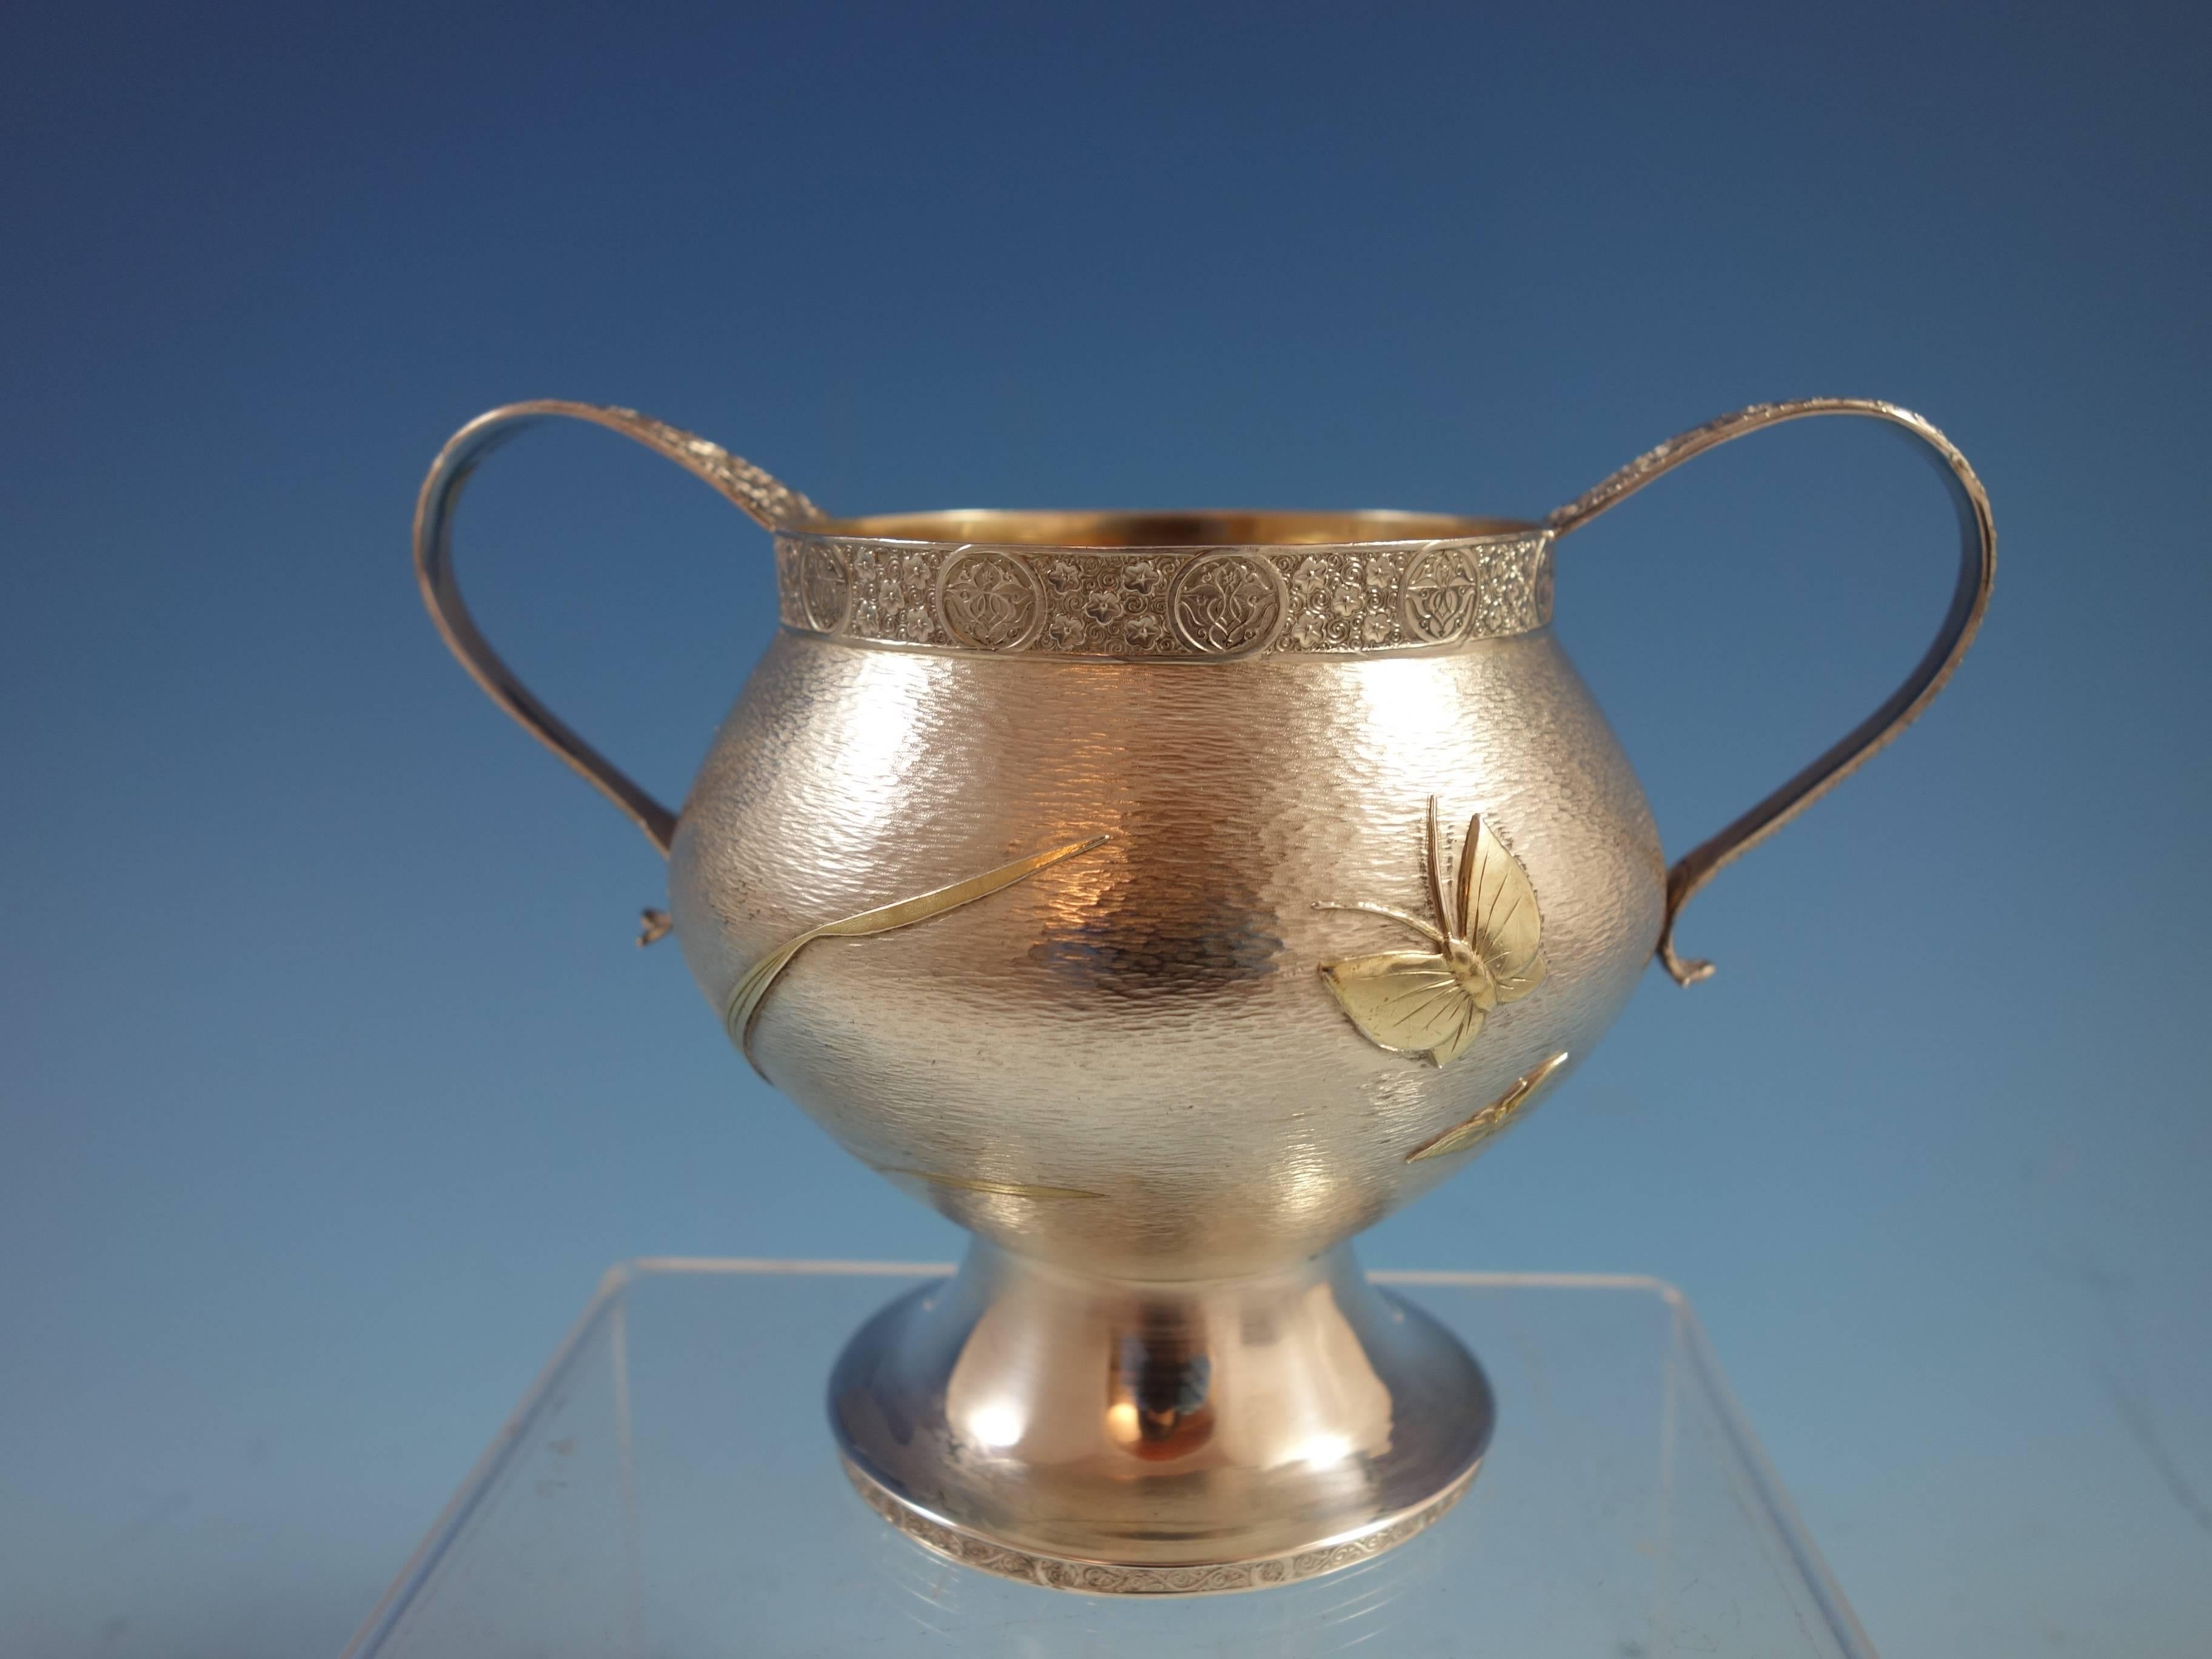 Exceptional Persian by Tiffany & Co. sterling silver sugar bowl. The piece has gorgeous applied gold grass/plants and gold butterflies. There are also partial gilt engraved details. The bowl is marked with #4494/M/8734